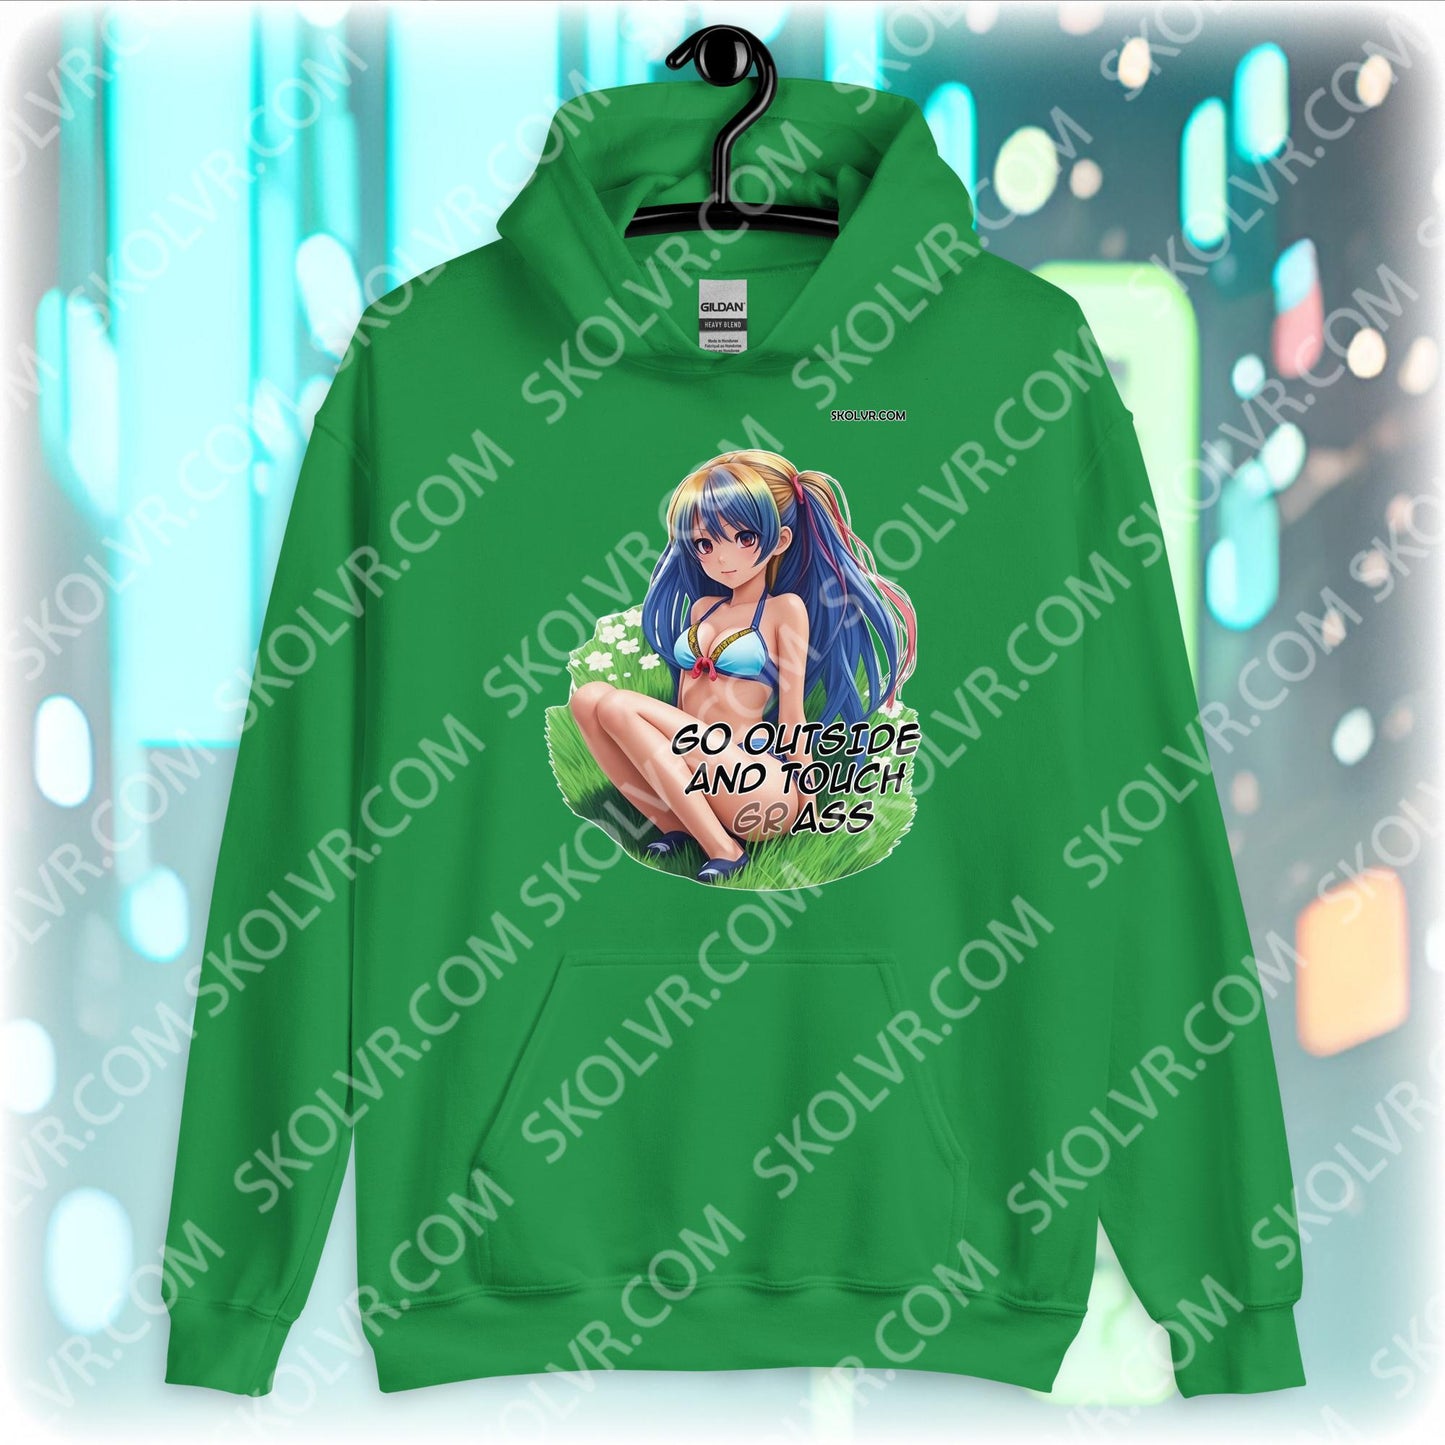 Unisex Hoodie 0012 Go outside and touch grass